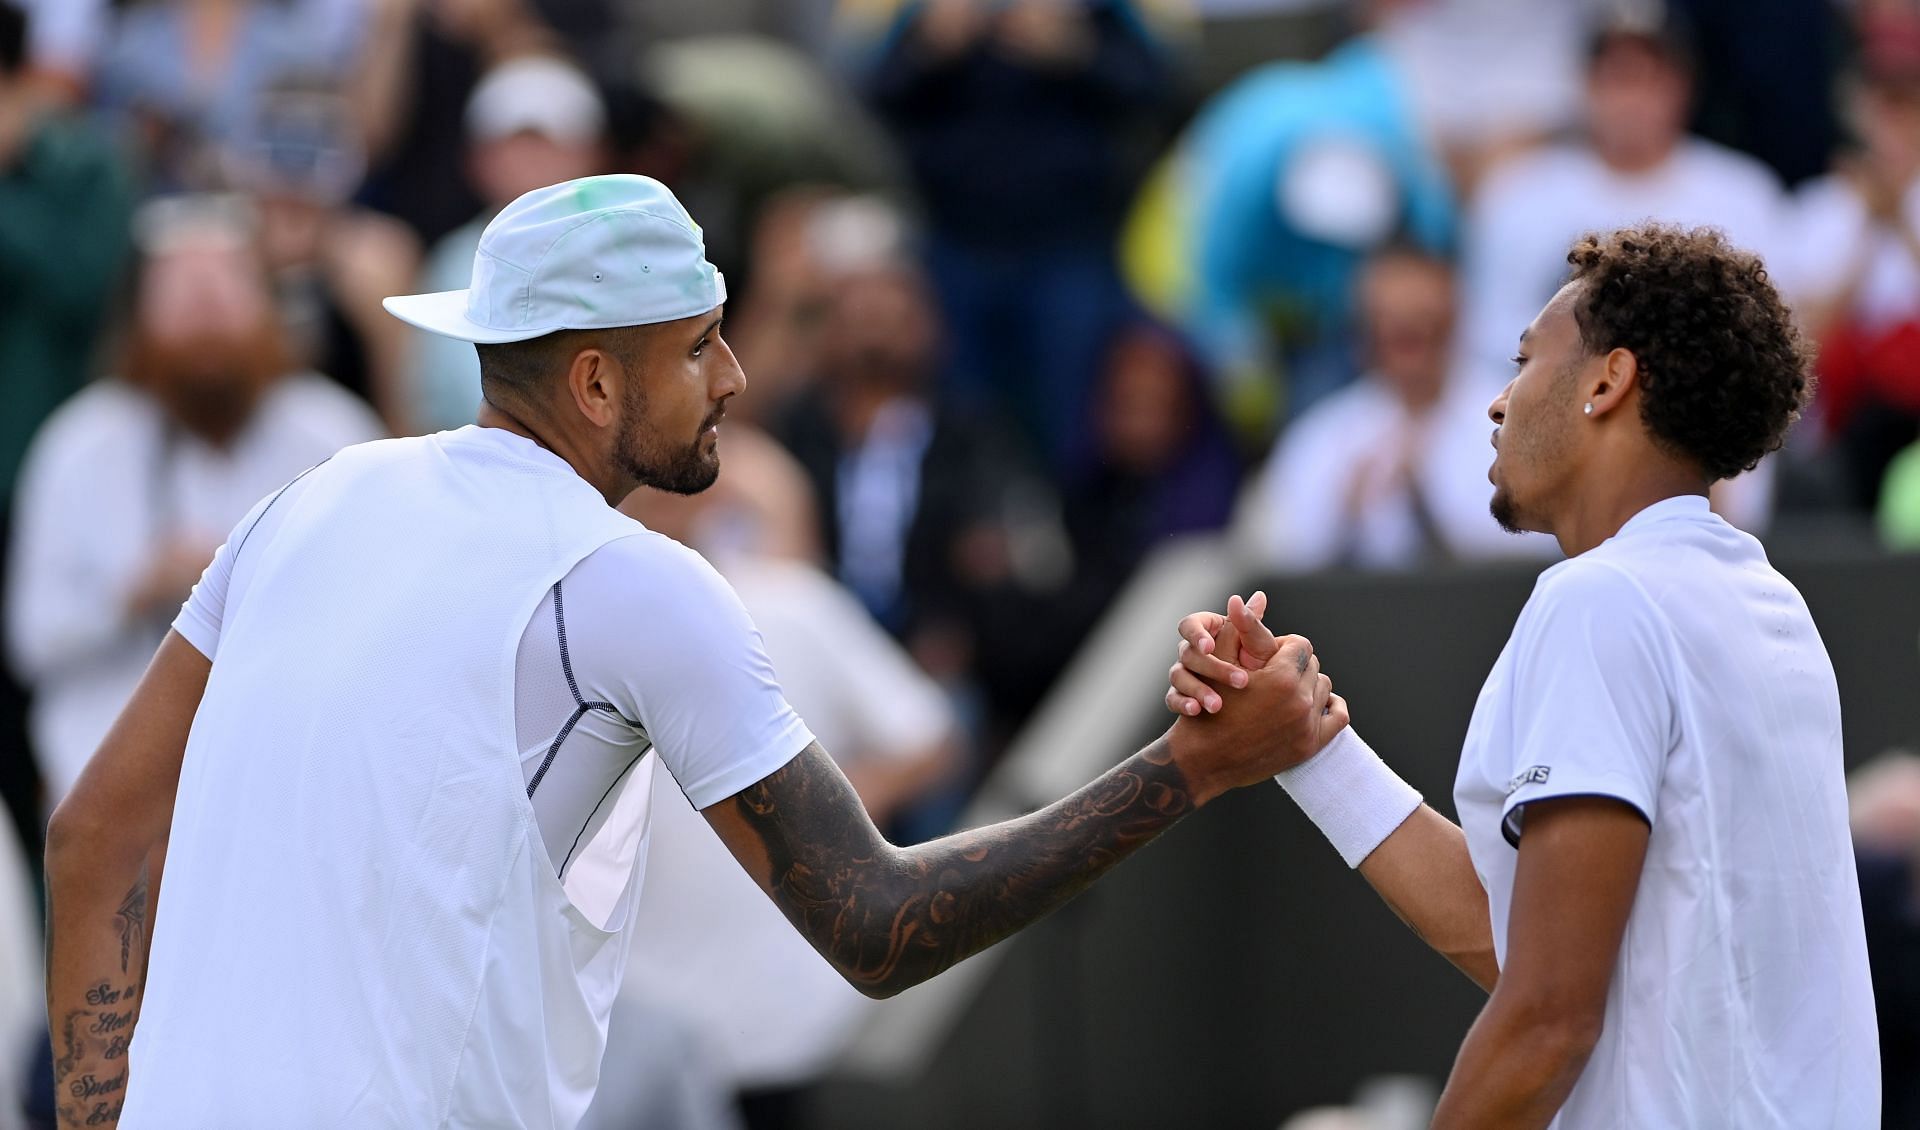 Kyrgios had a verbal altercation with a line judge before getting past Paul Jubb